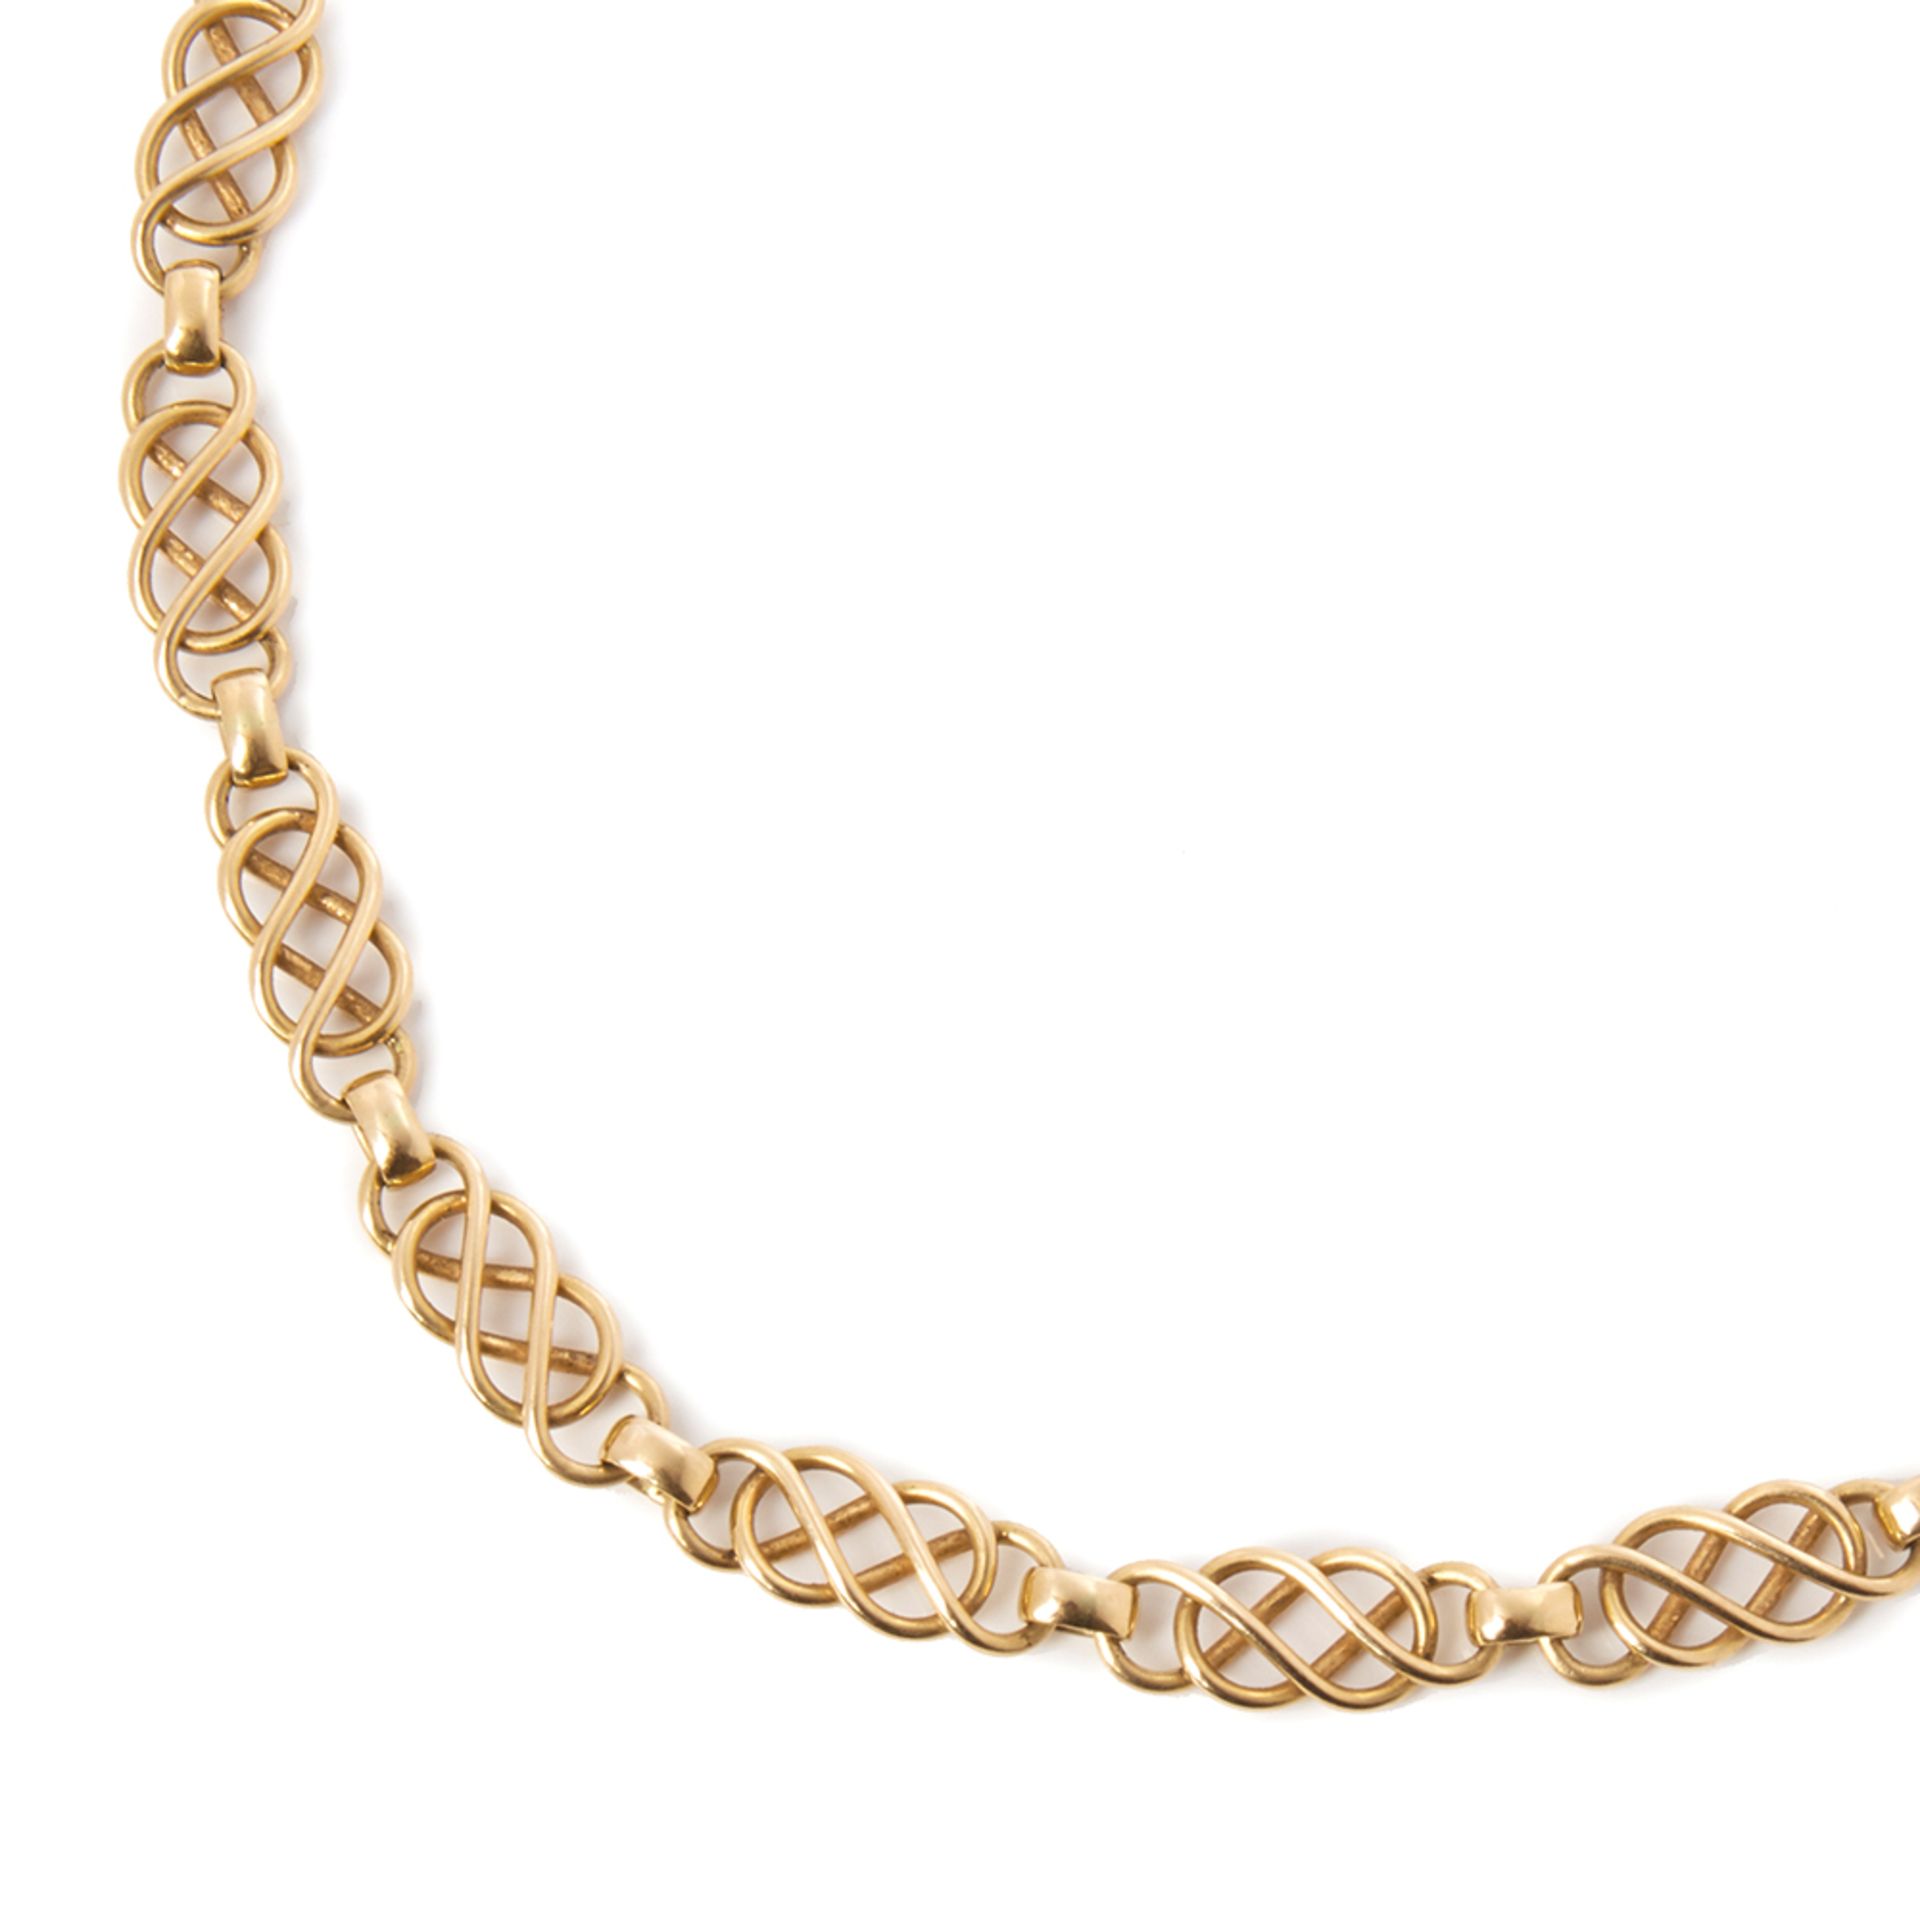 Georg Jensen 18k Yellow Gold Chain Vintage Necklace - Image 3 of 7